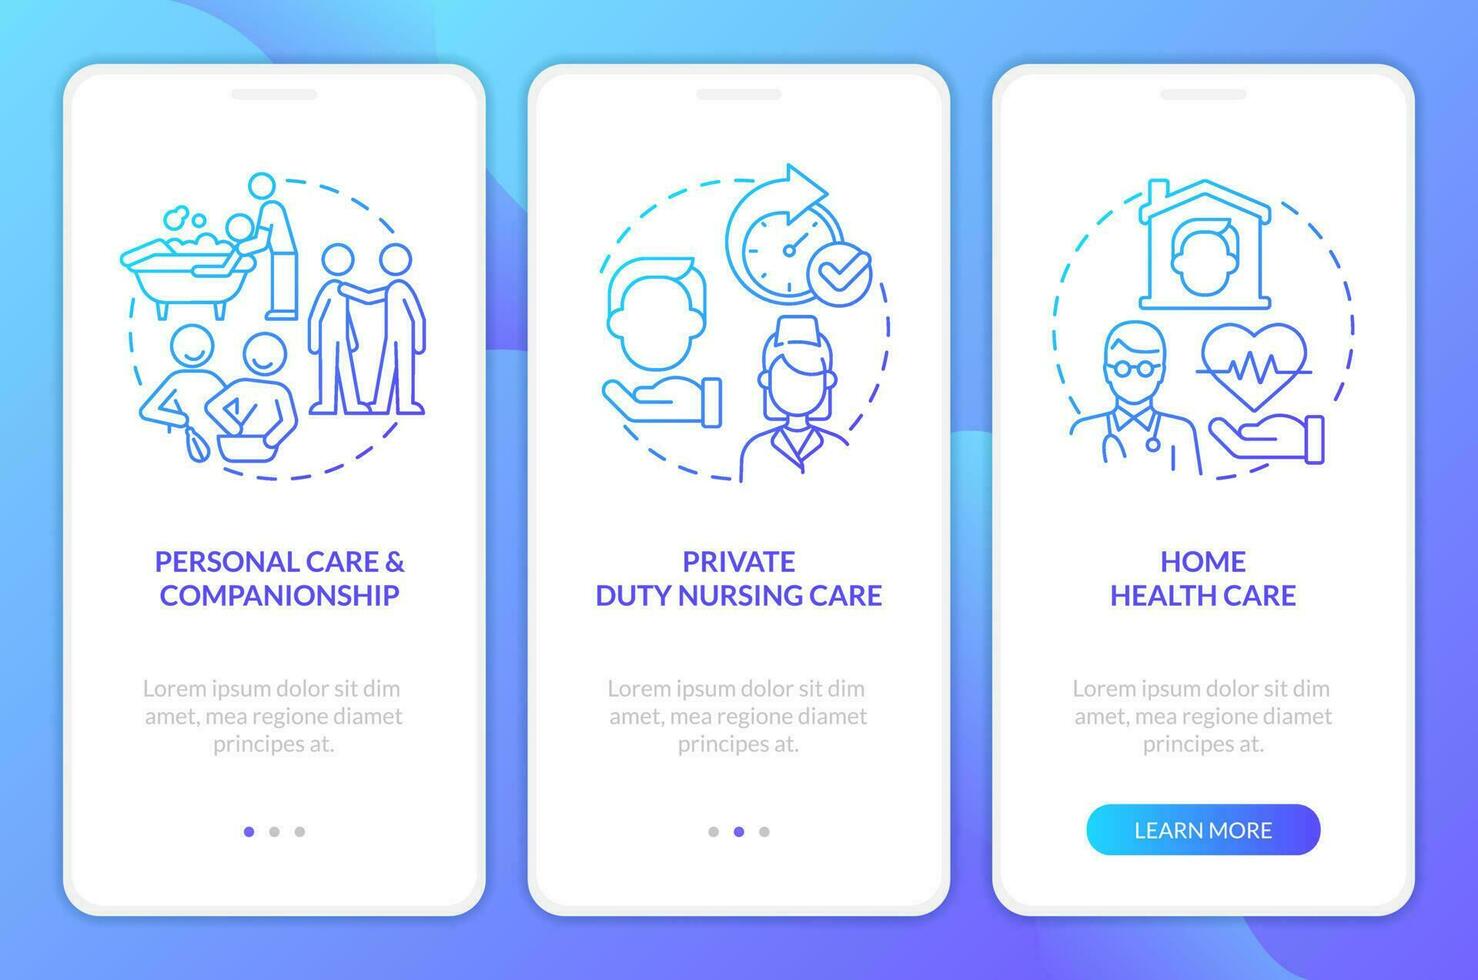 Home health care types blue gradient onboarding mobile app screen. Walkthrough 3 steps graphic instructions with linear concepts. UI, UX, GUI template vector